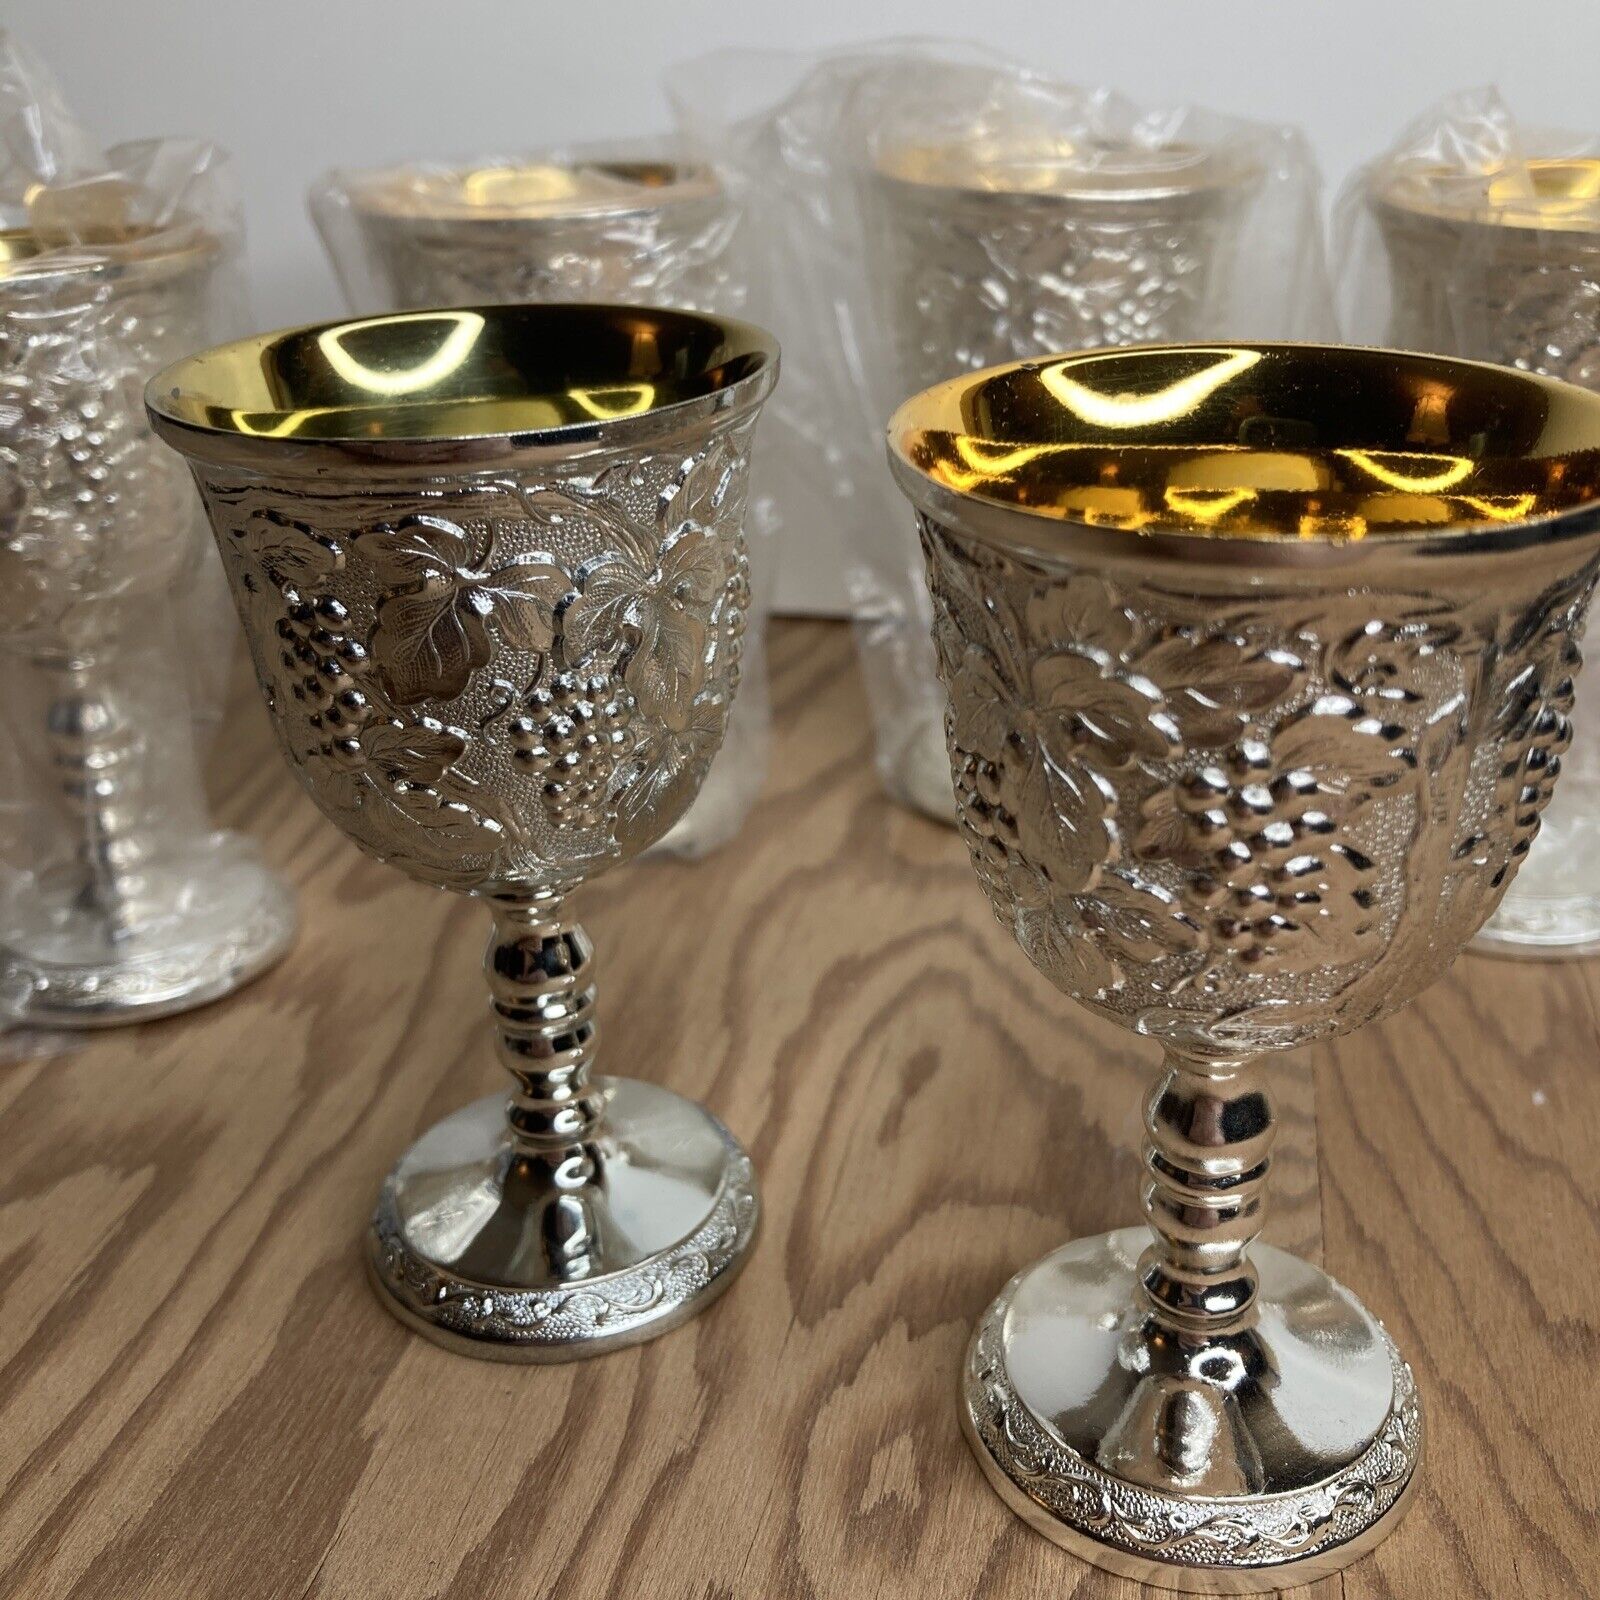 BRAND NEW Vintage Set of 6 Silver Plate Japanese Wine Goblets - 3.5” Tall Japan